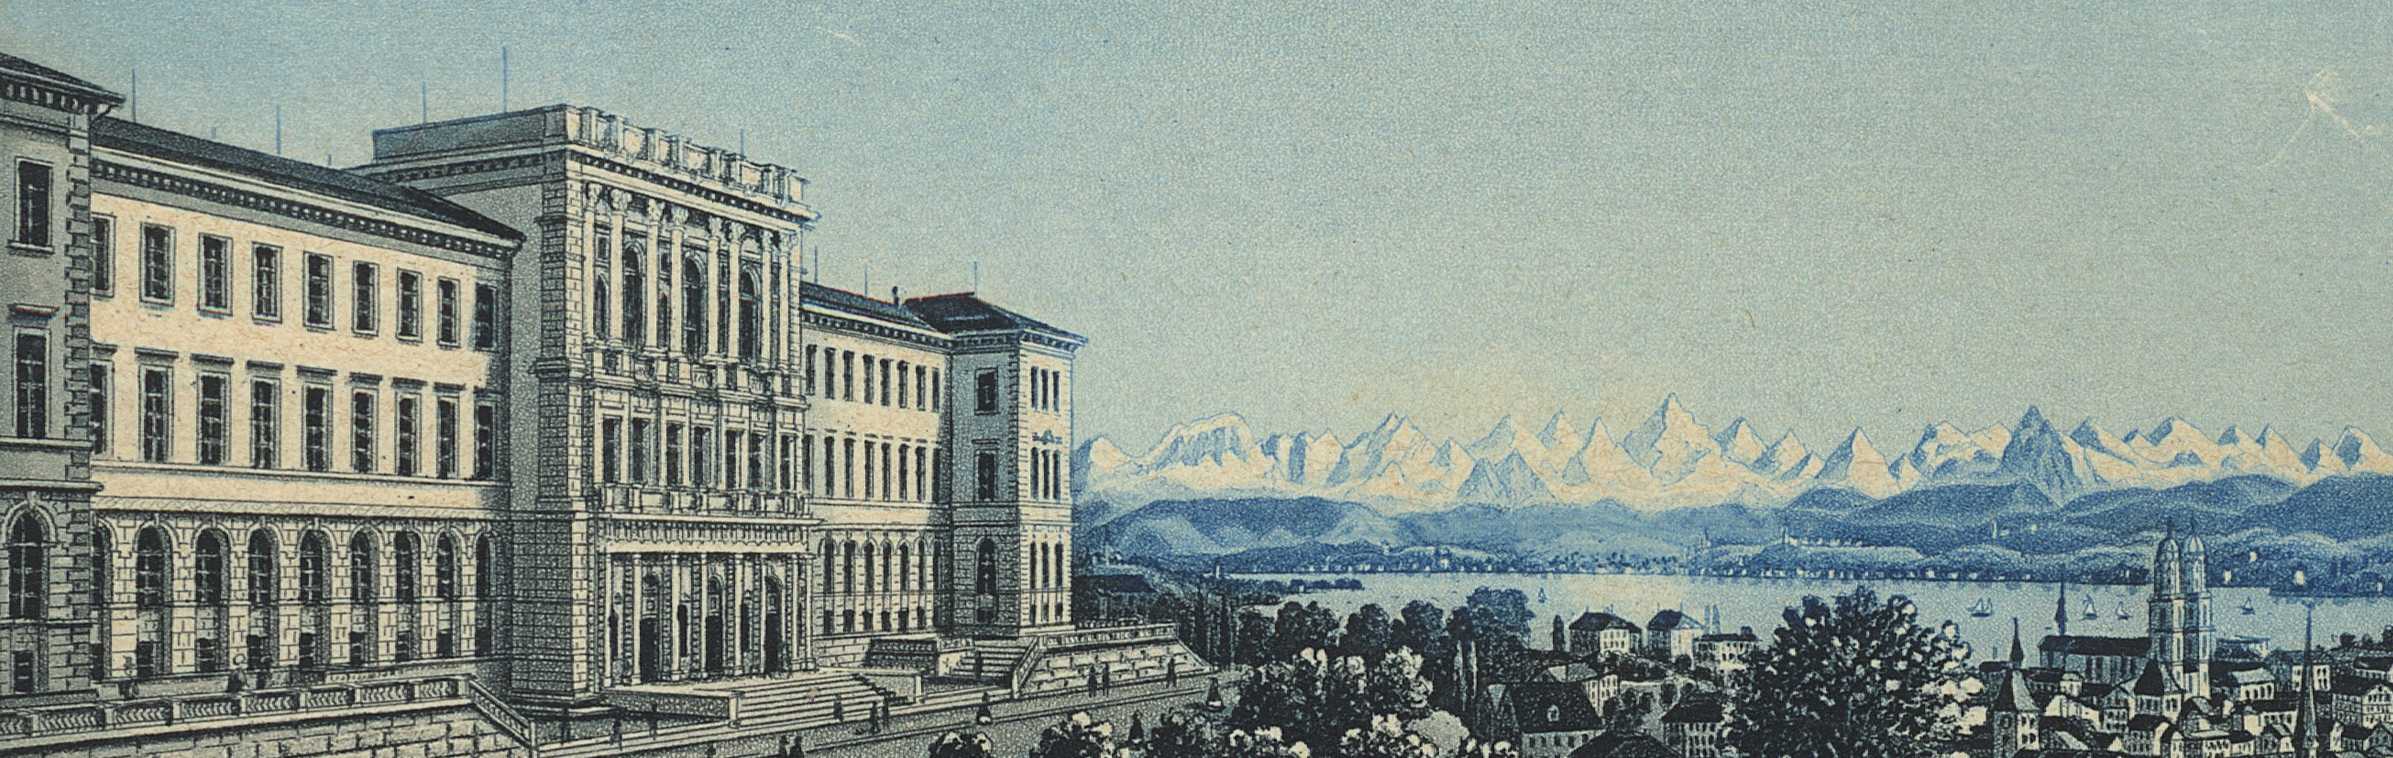 The ETH Zurich's main building in the 19th century 